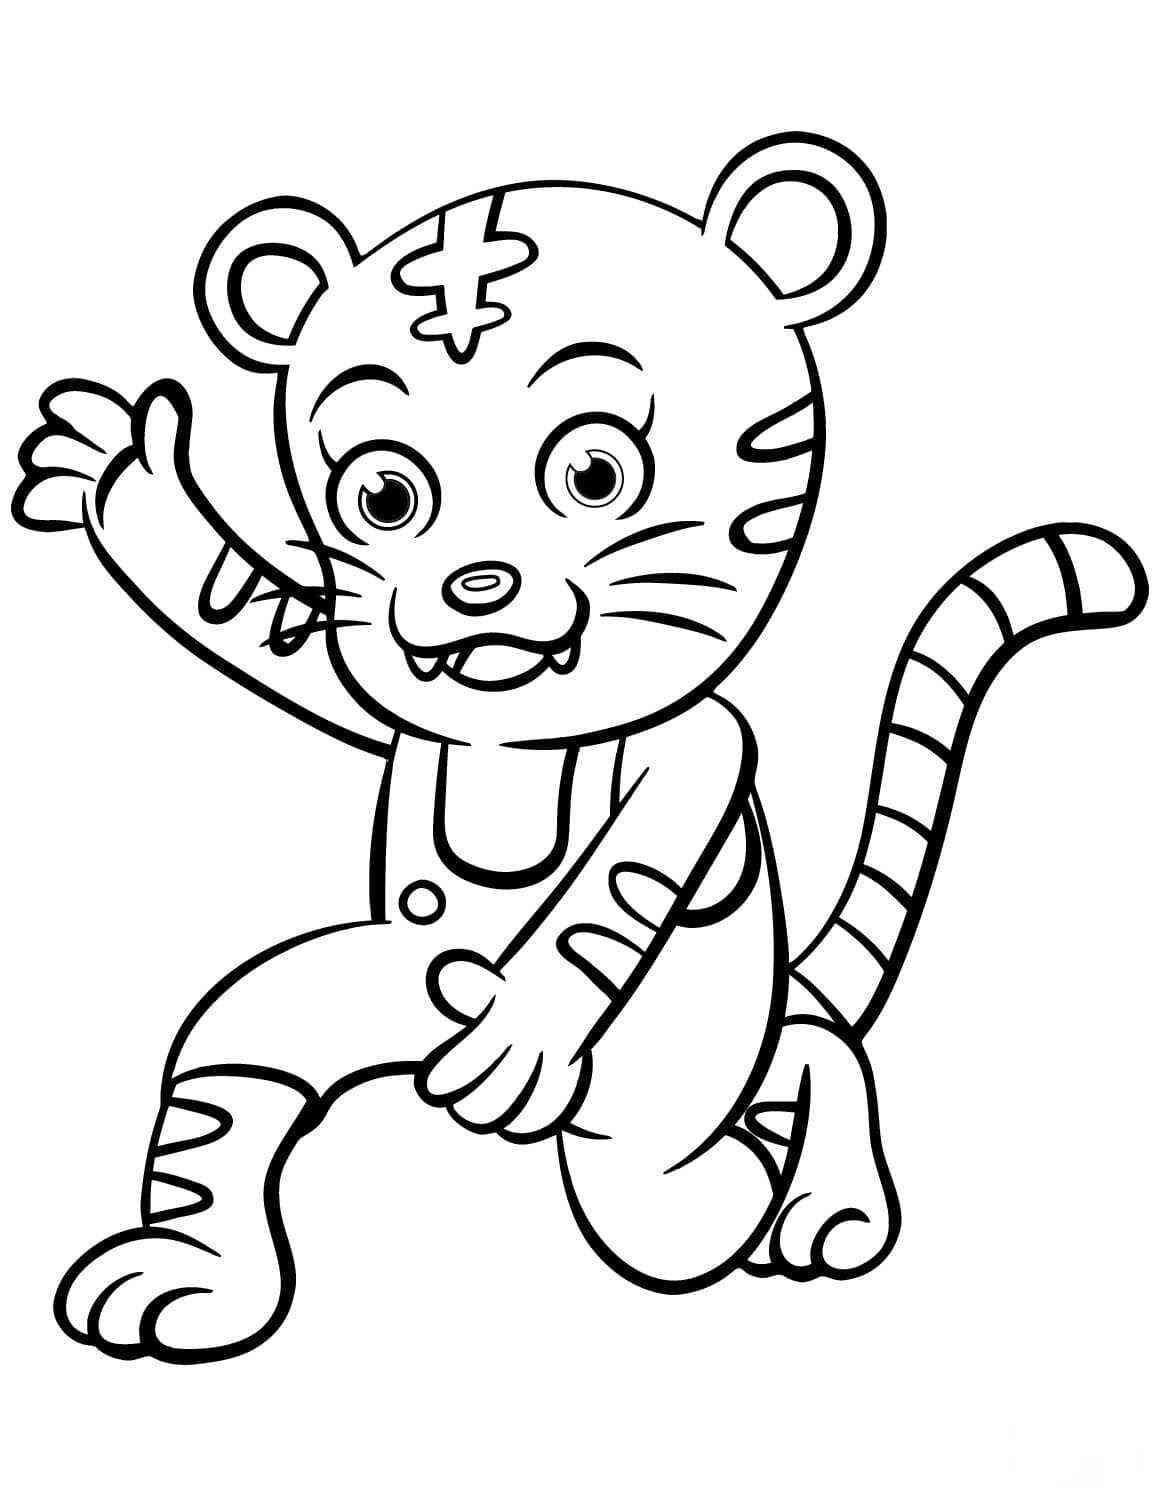 Daniel tiger wears overall Coloring Page